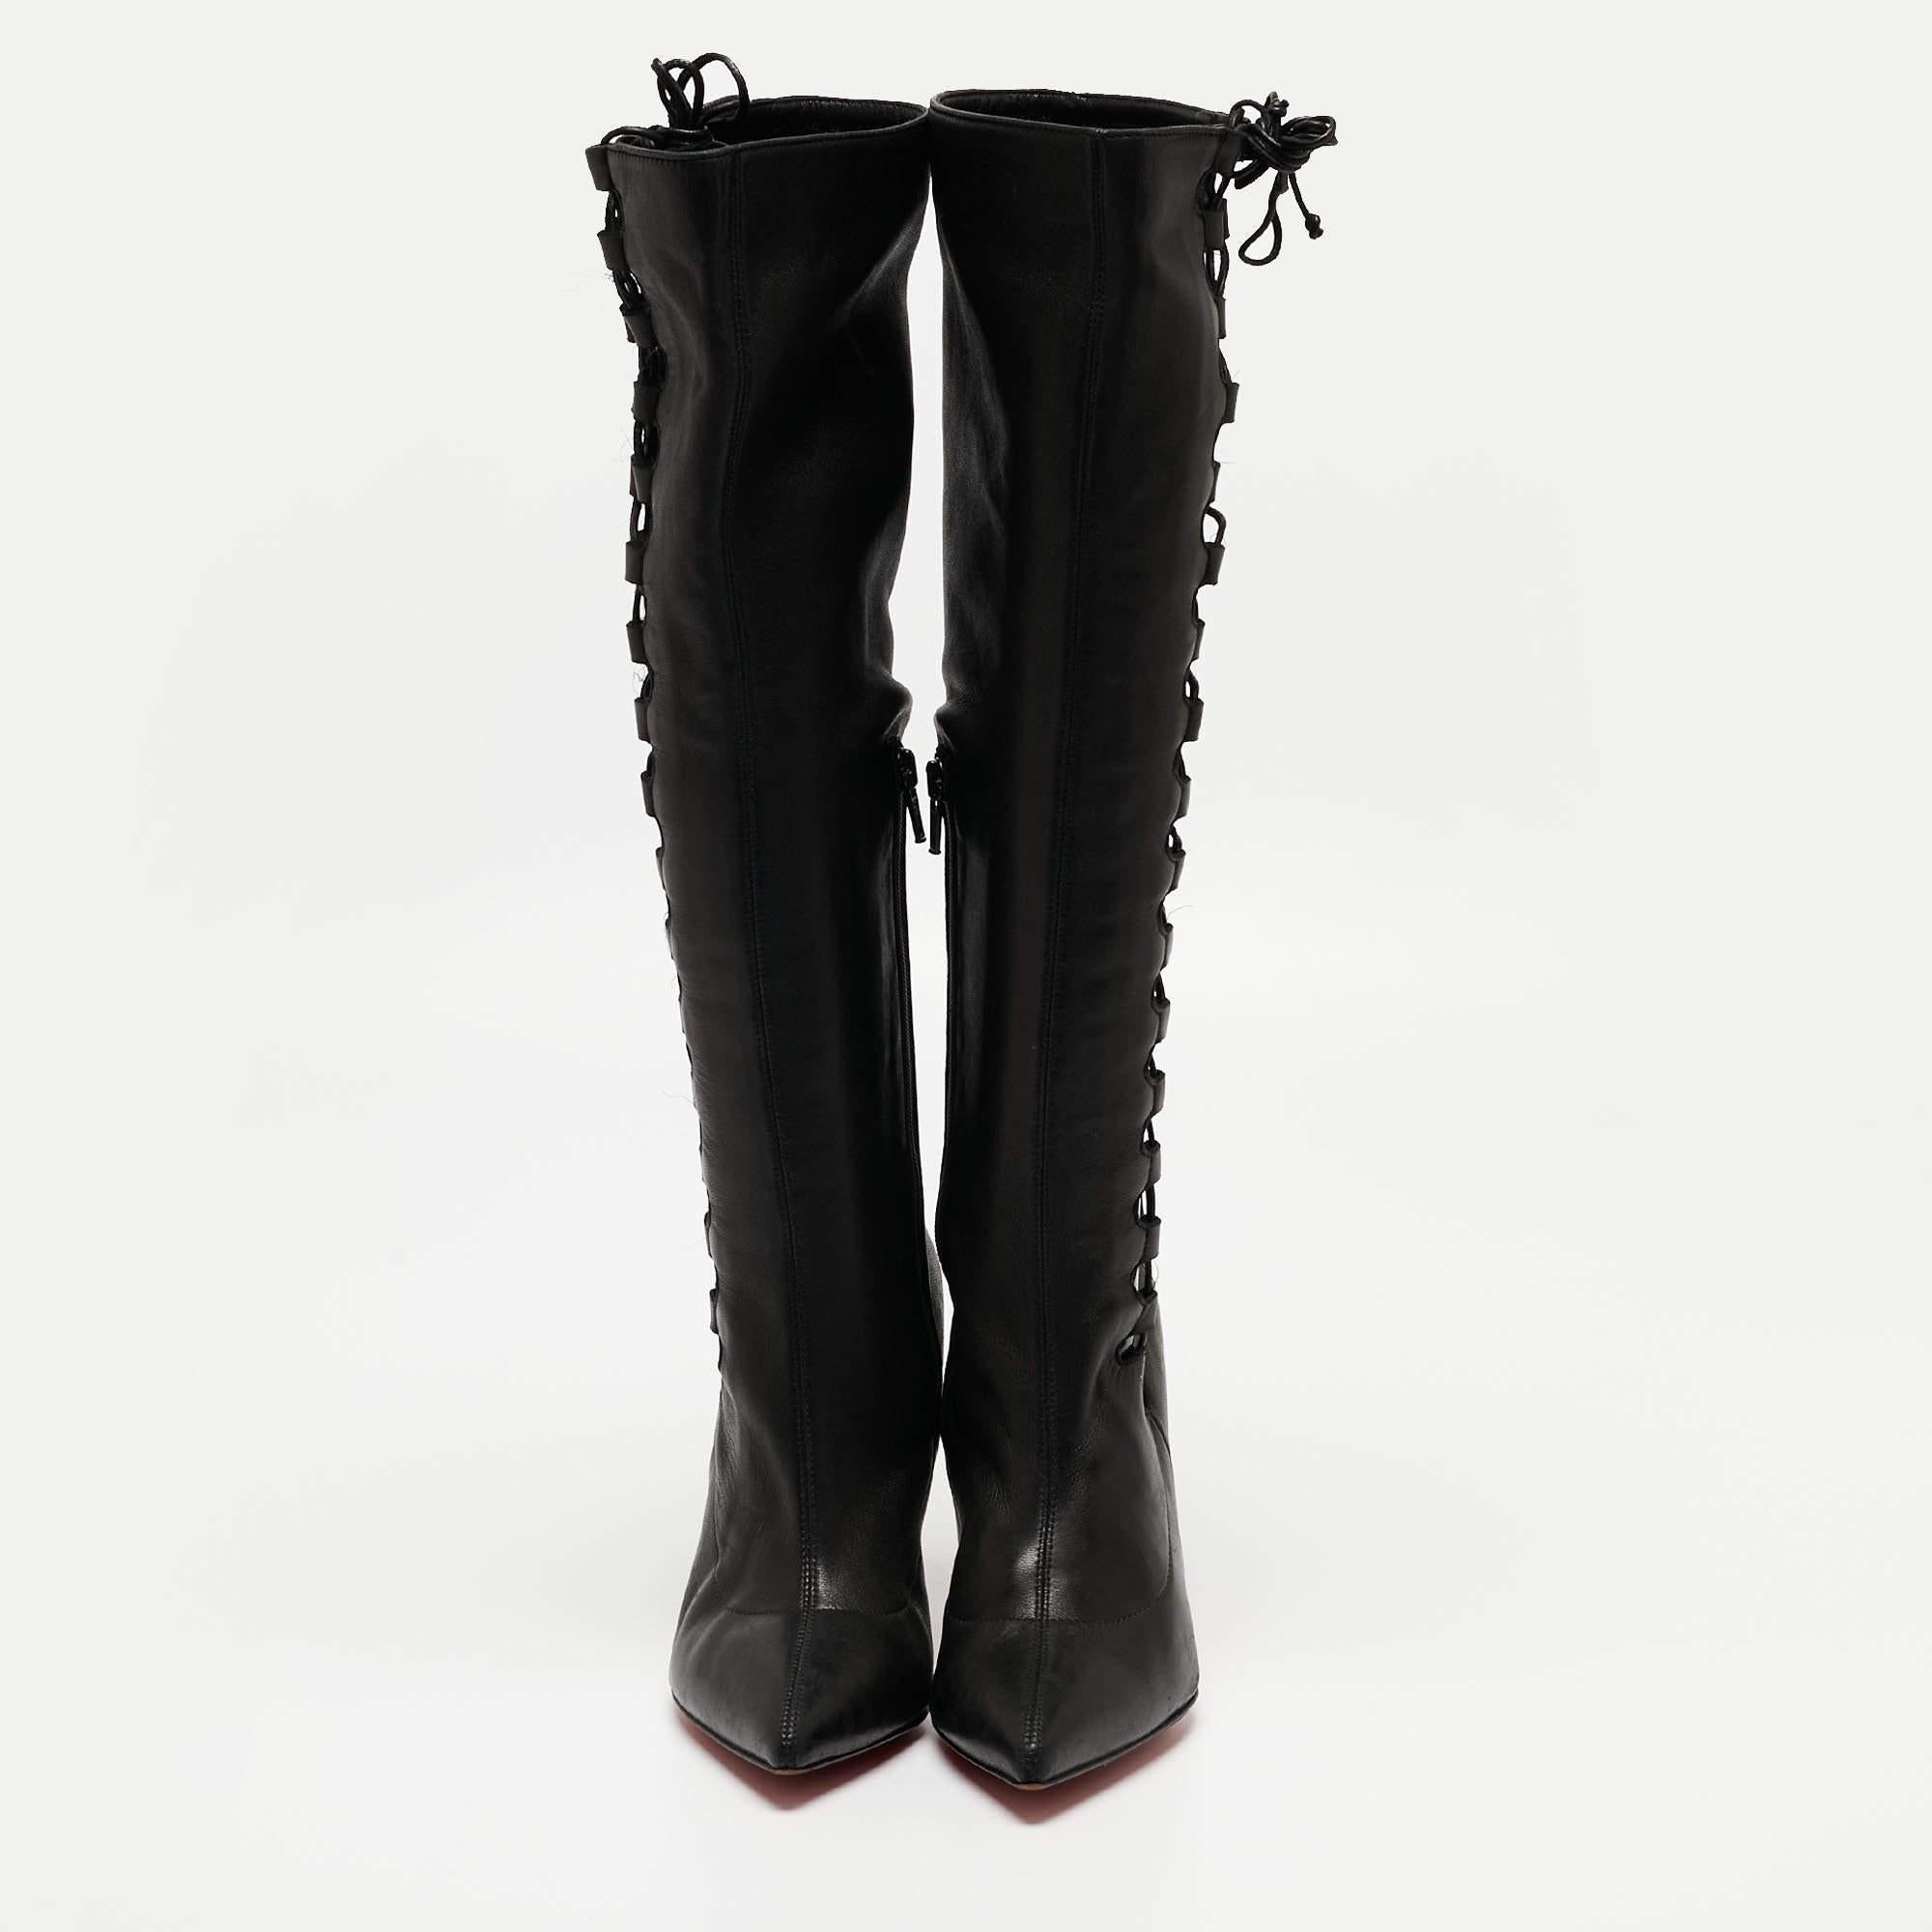 If the quest is for a pair of black boots, we'll gladly choose this one by Christian Louboutin. The women's boots are crafted from leather as knee-high and designed with side strings and sleek heels.

